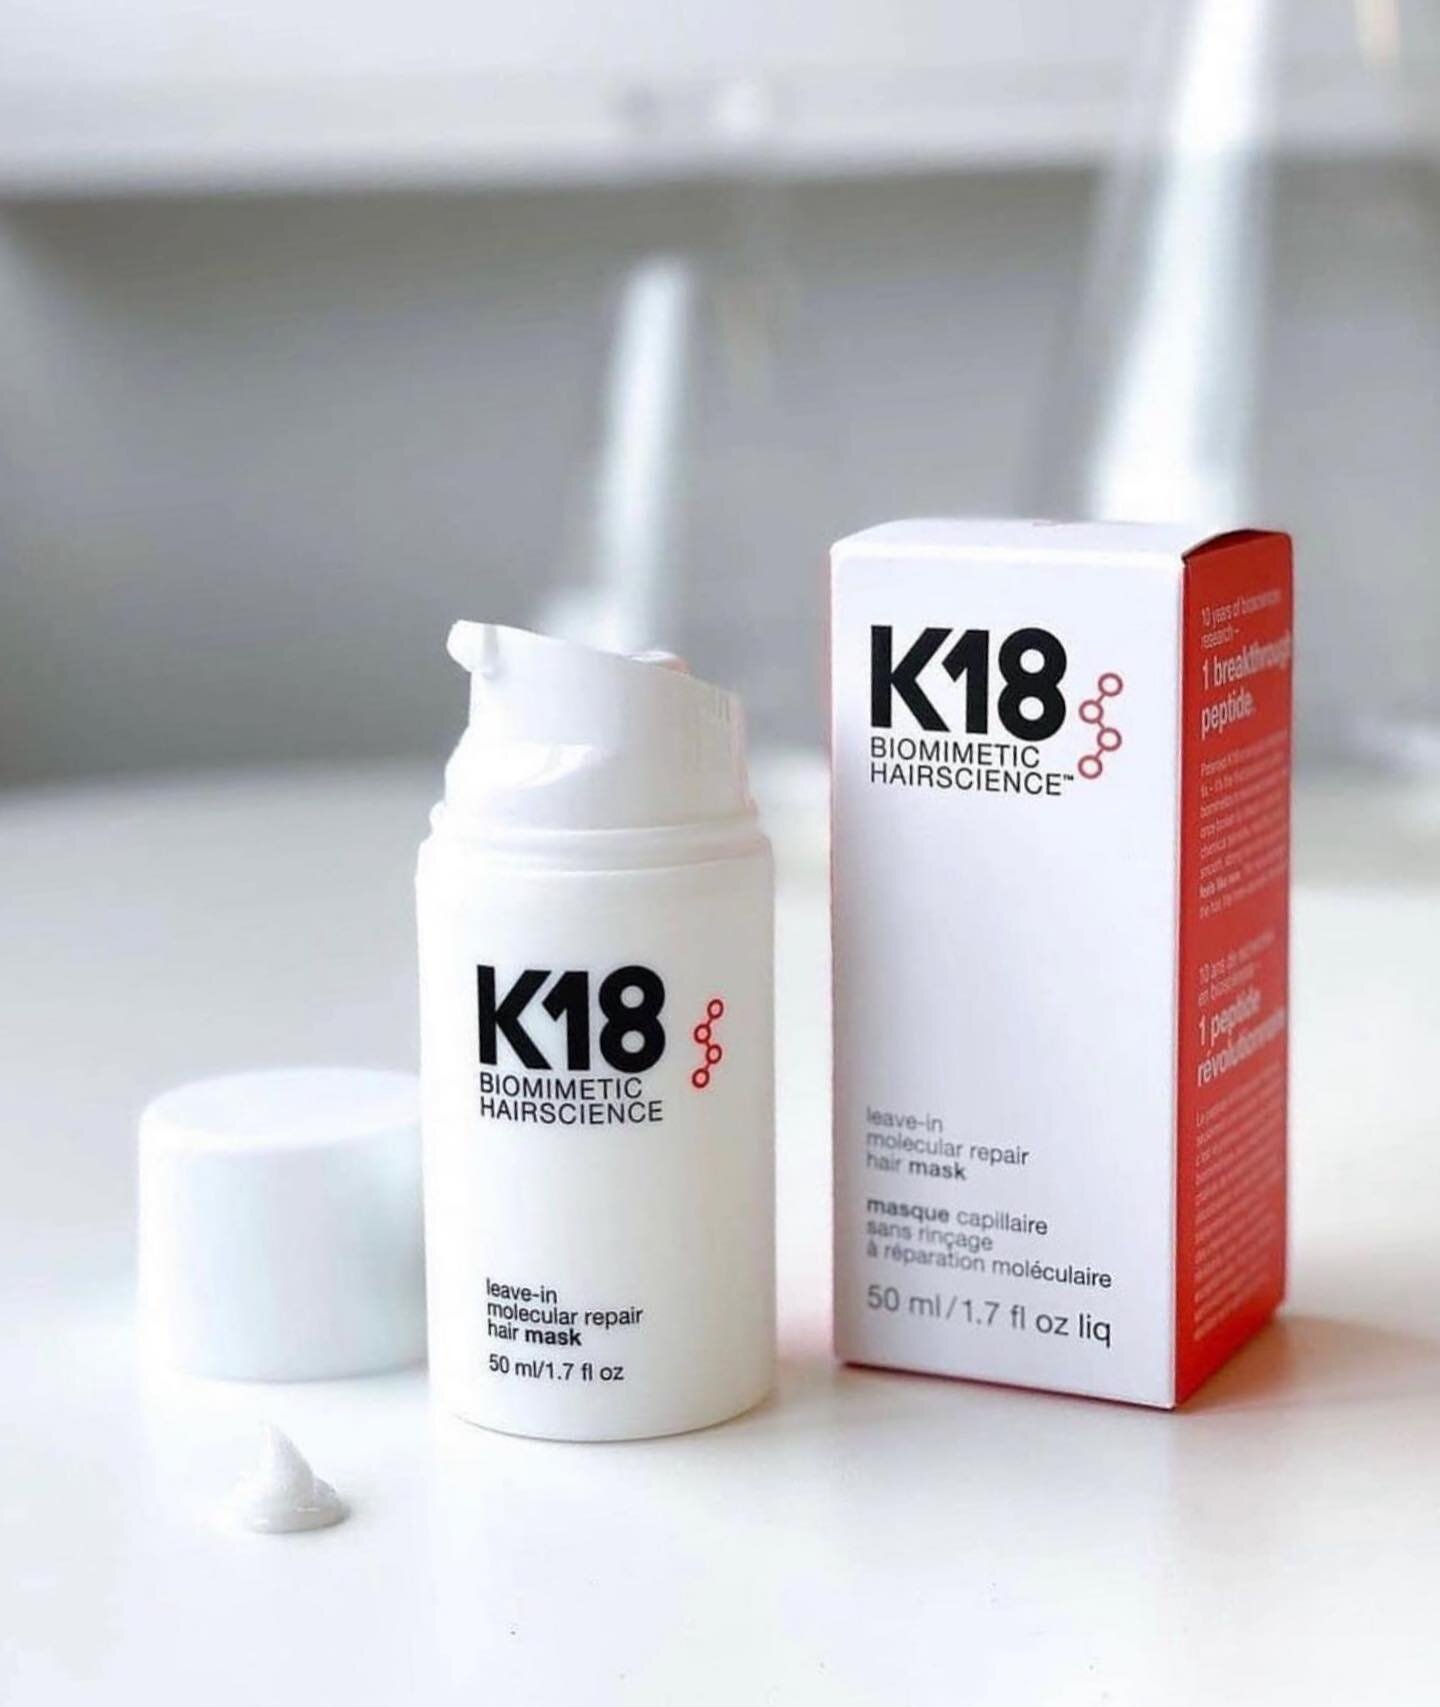 Have you heard?!

K18 is clinically proven to reverse damaged hair in just 4 minutes!

Here&rsquo;s just a few benefits this amazing treatments has 👇🏼👇🏼👇🏼

🌱Heals damage from bleach, color, chemical services, and heat

🌱Restores strength, sof